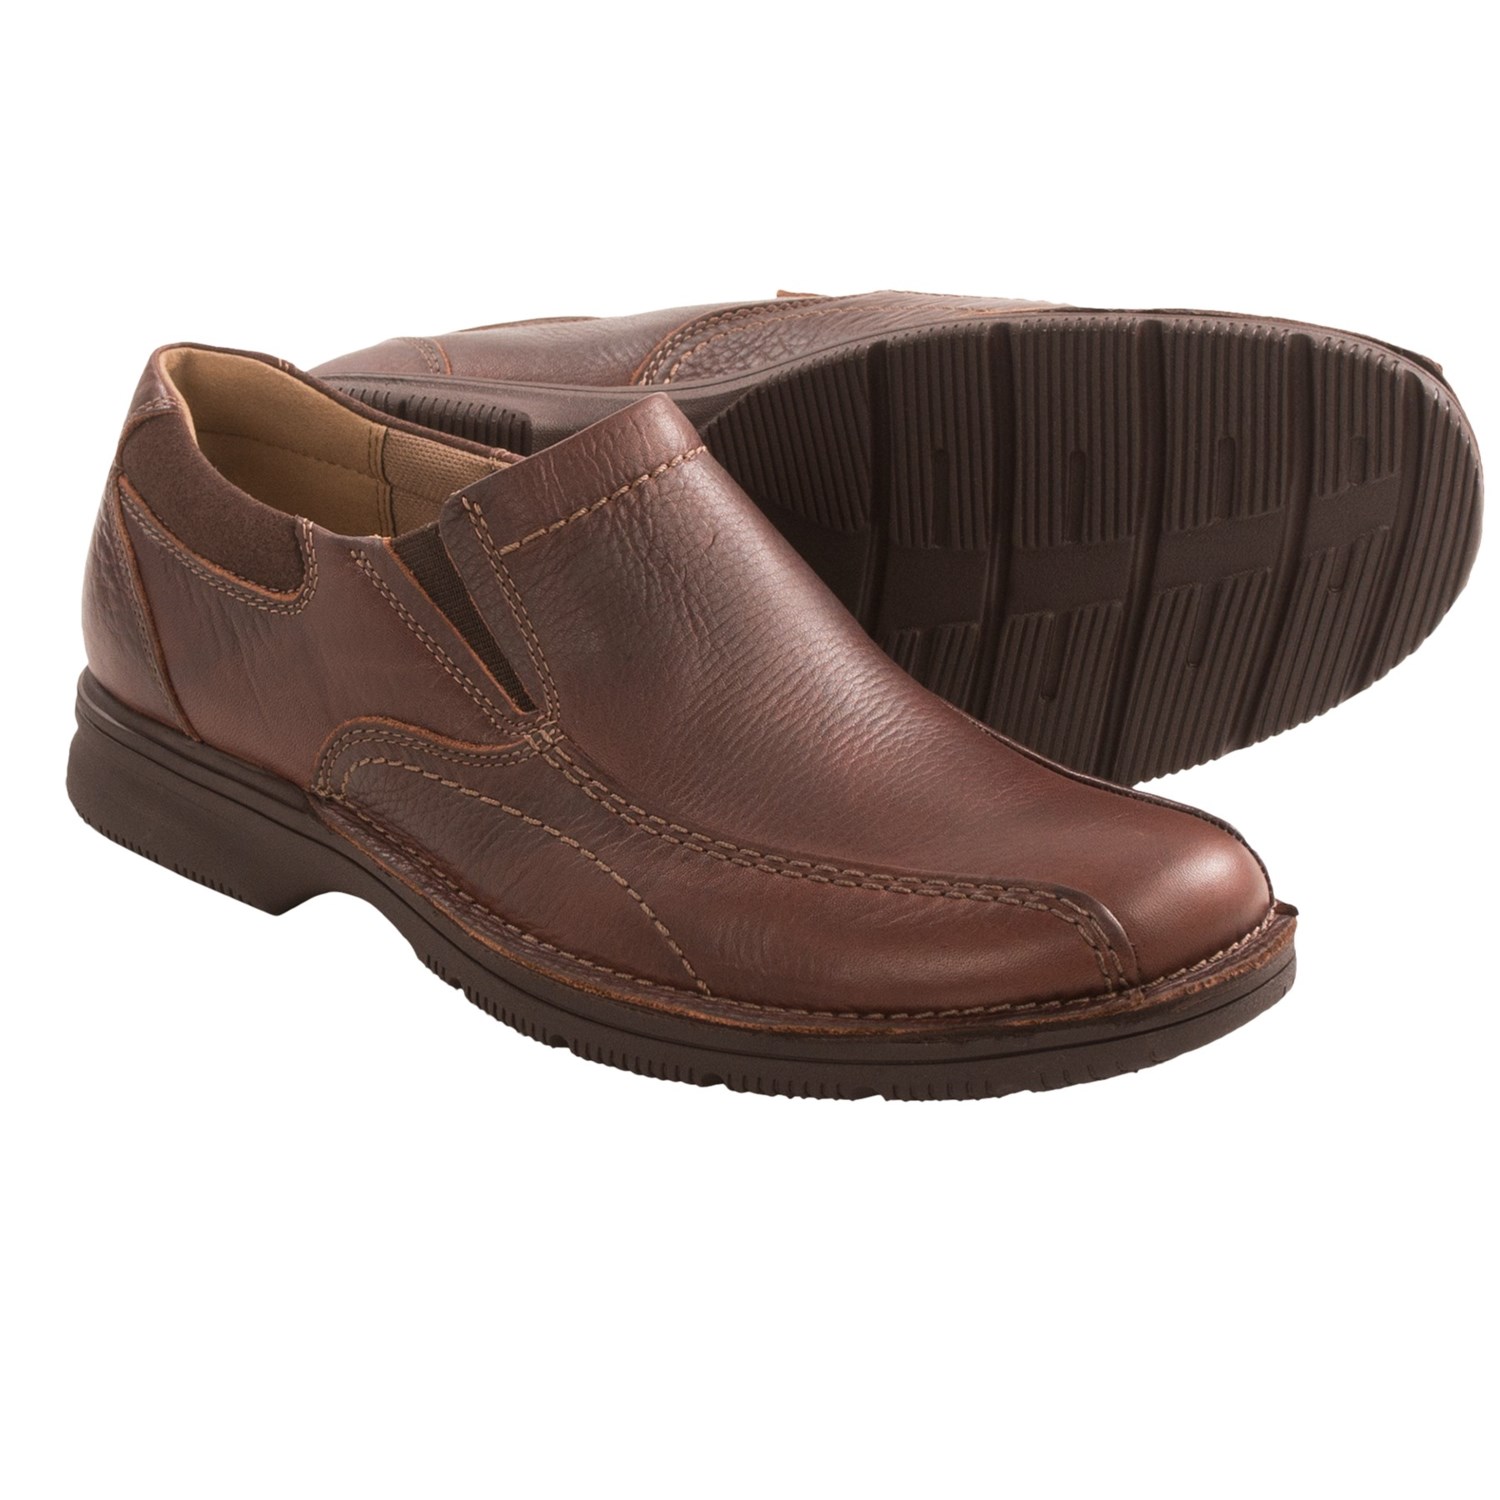 Clarks Senner Pine Shoes - Slip-Ons (For Men) in Brown Tumbled Leather